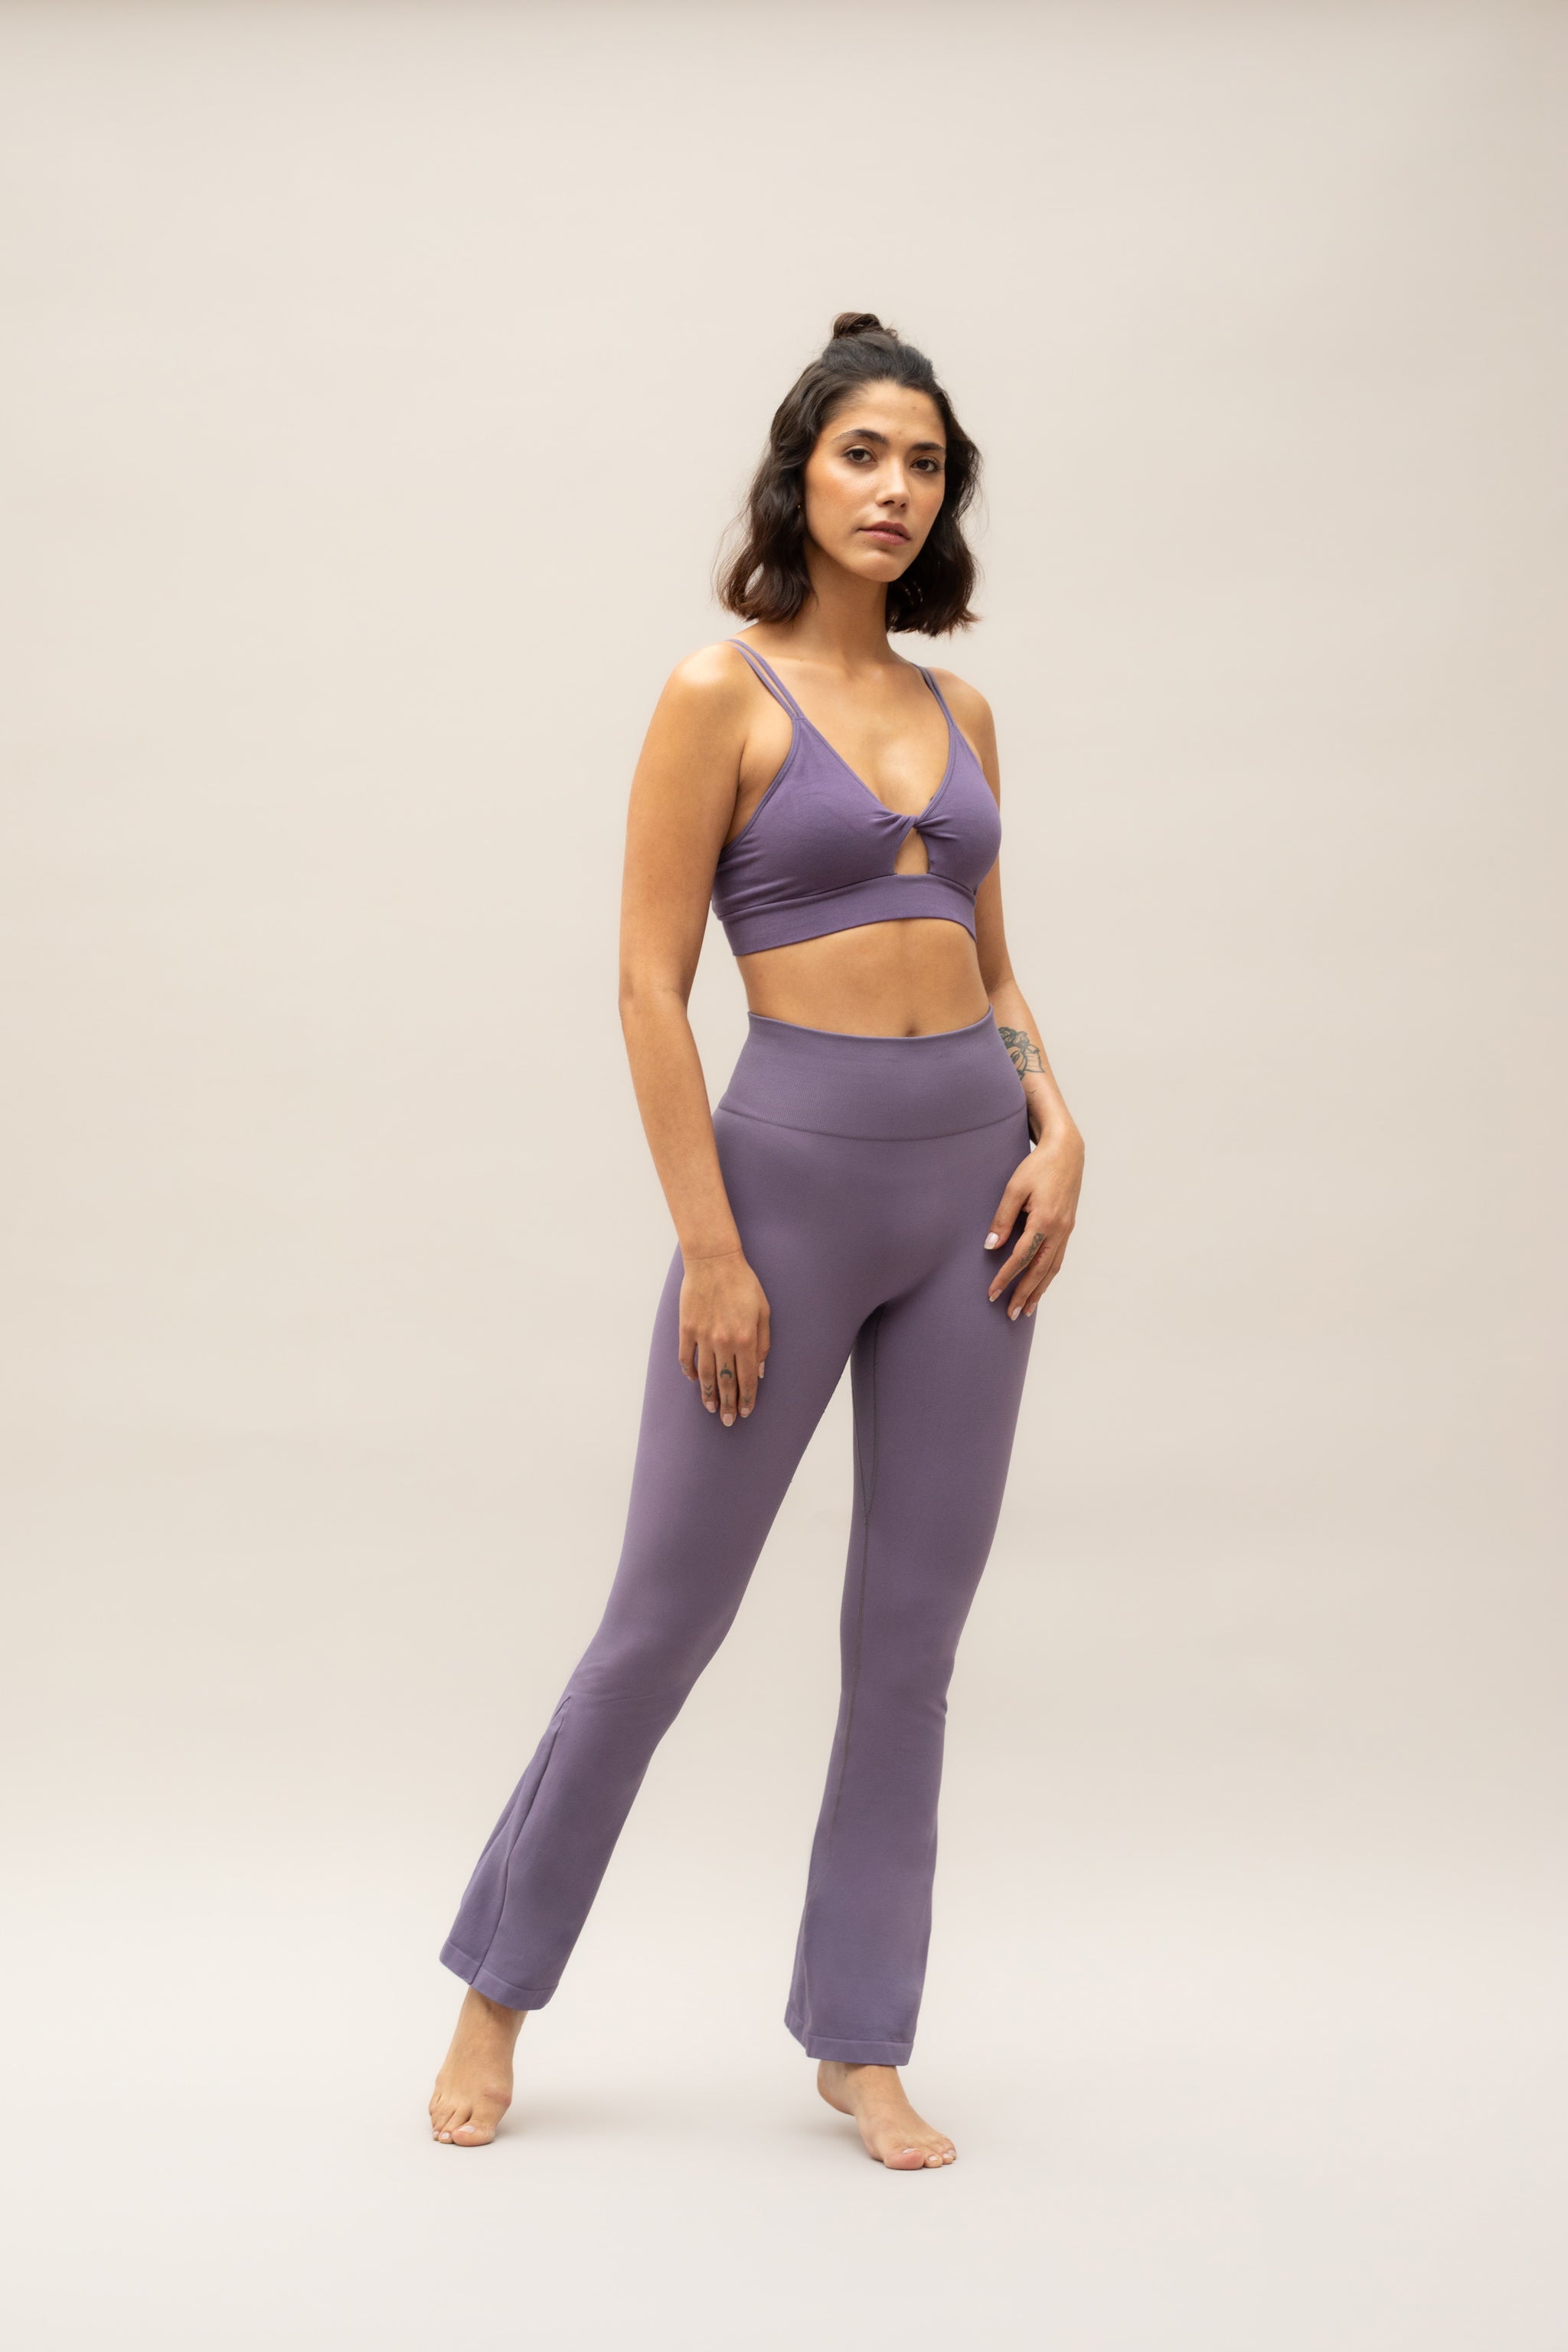 Twisted front purple supportive sports bra from sustainable activewear brand, Jilla.